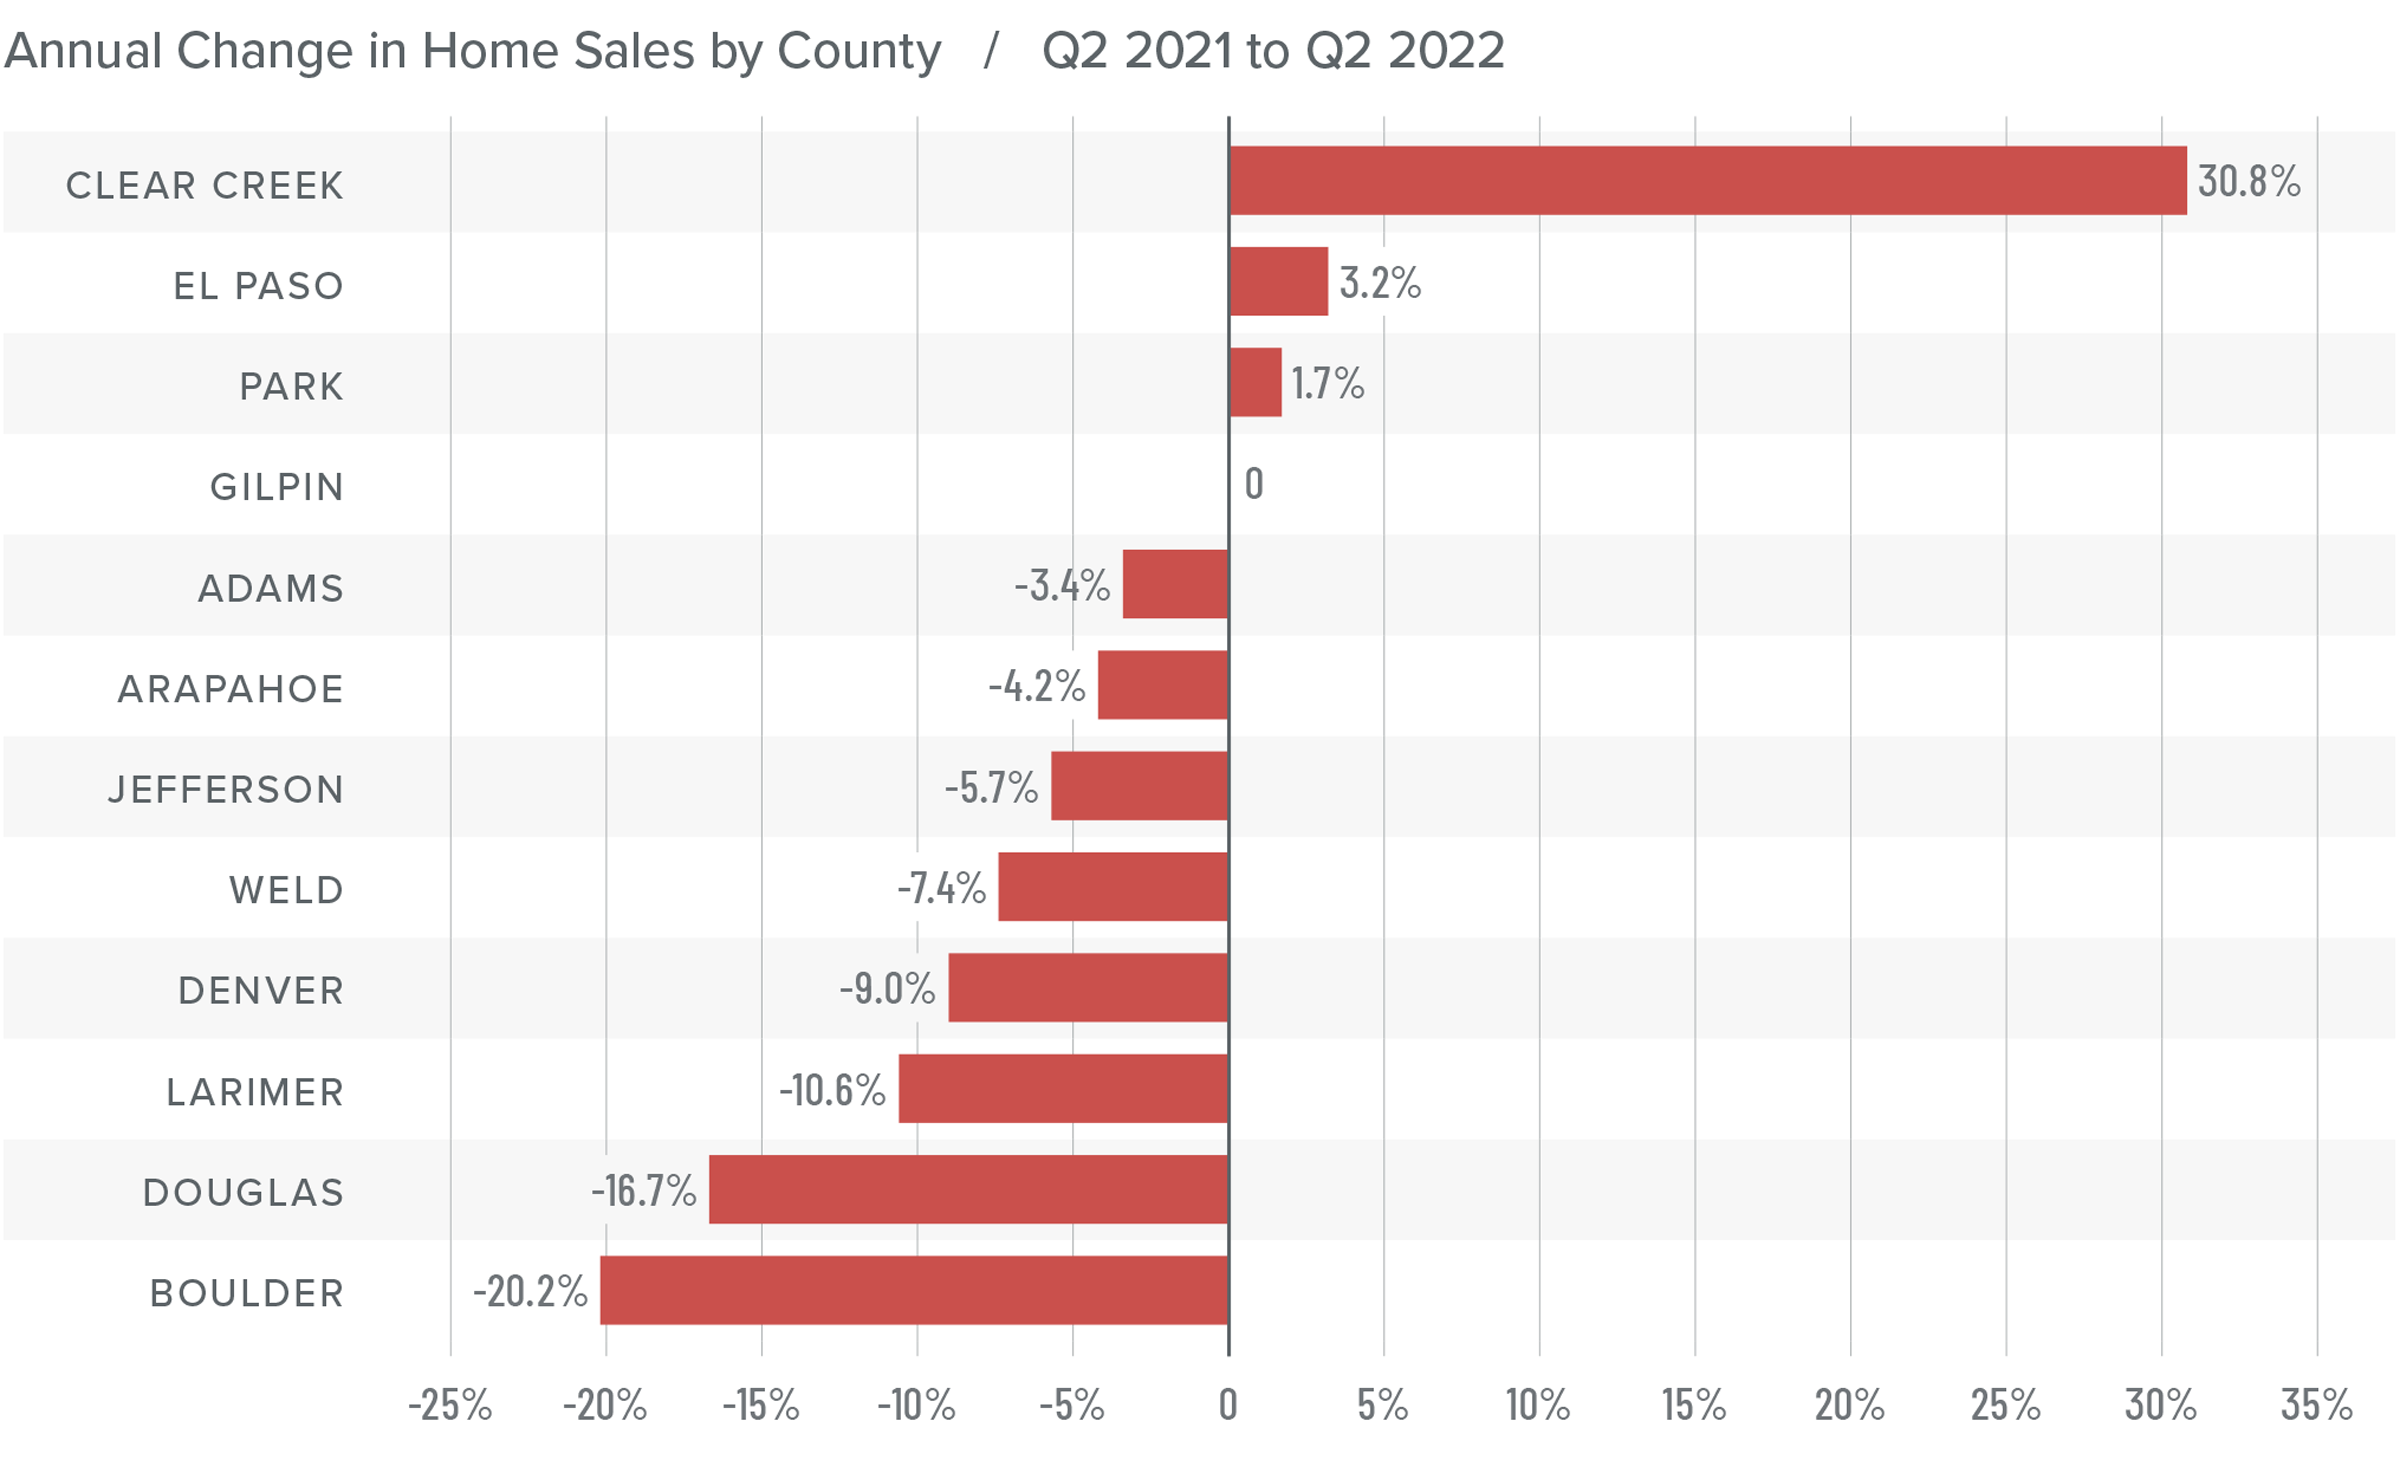 A bar graph showing the annual change in home sales for various counties in Colorado from Q2 2021 to Q2 2022. The counties with a positive percentage year-over-year change are Clear Creek at 30.8%, El Paso at 3.2%, and Park at 1.7%. Gilpin County had a 0% change. The counties with a negative year-over-year change are Adams at -3.4%, Arapahoe at -4.2%, Jefferson at -5.7%, Weld at -7.4%, Denver at -9%, Larimer at -10.6%, Douglas at -16.7%, and Boulder at -20.2%.